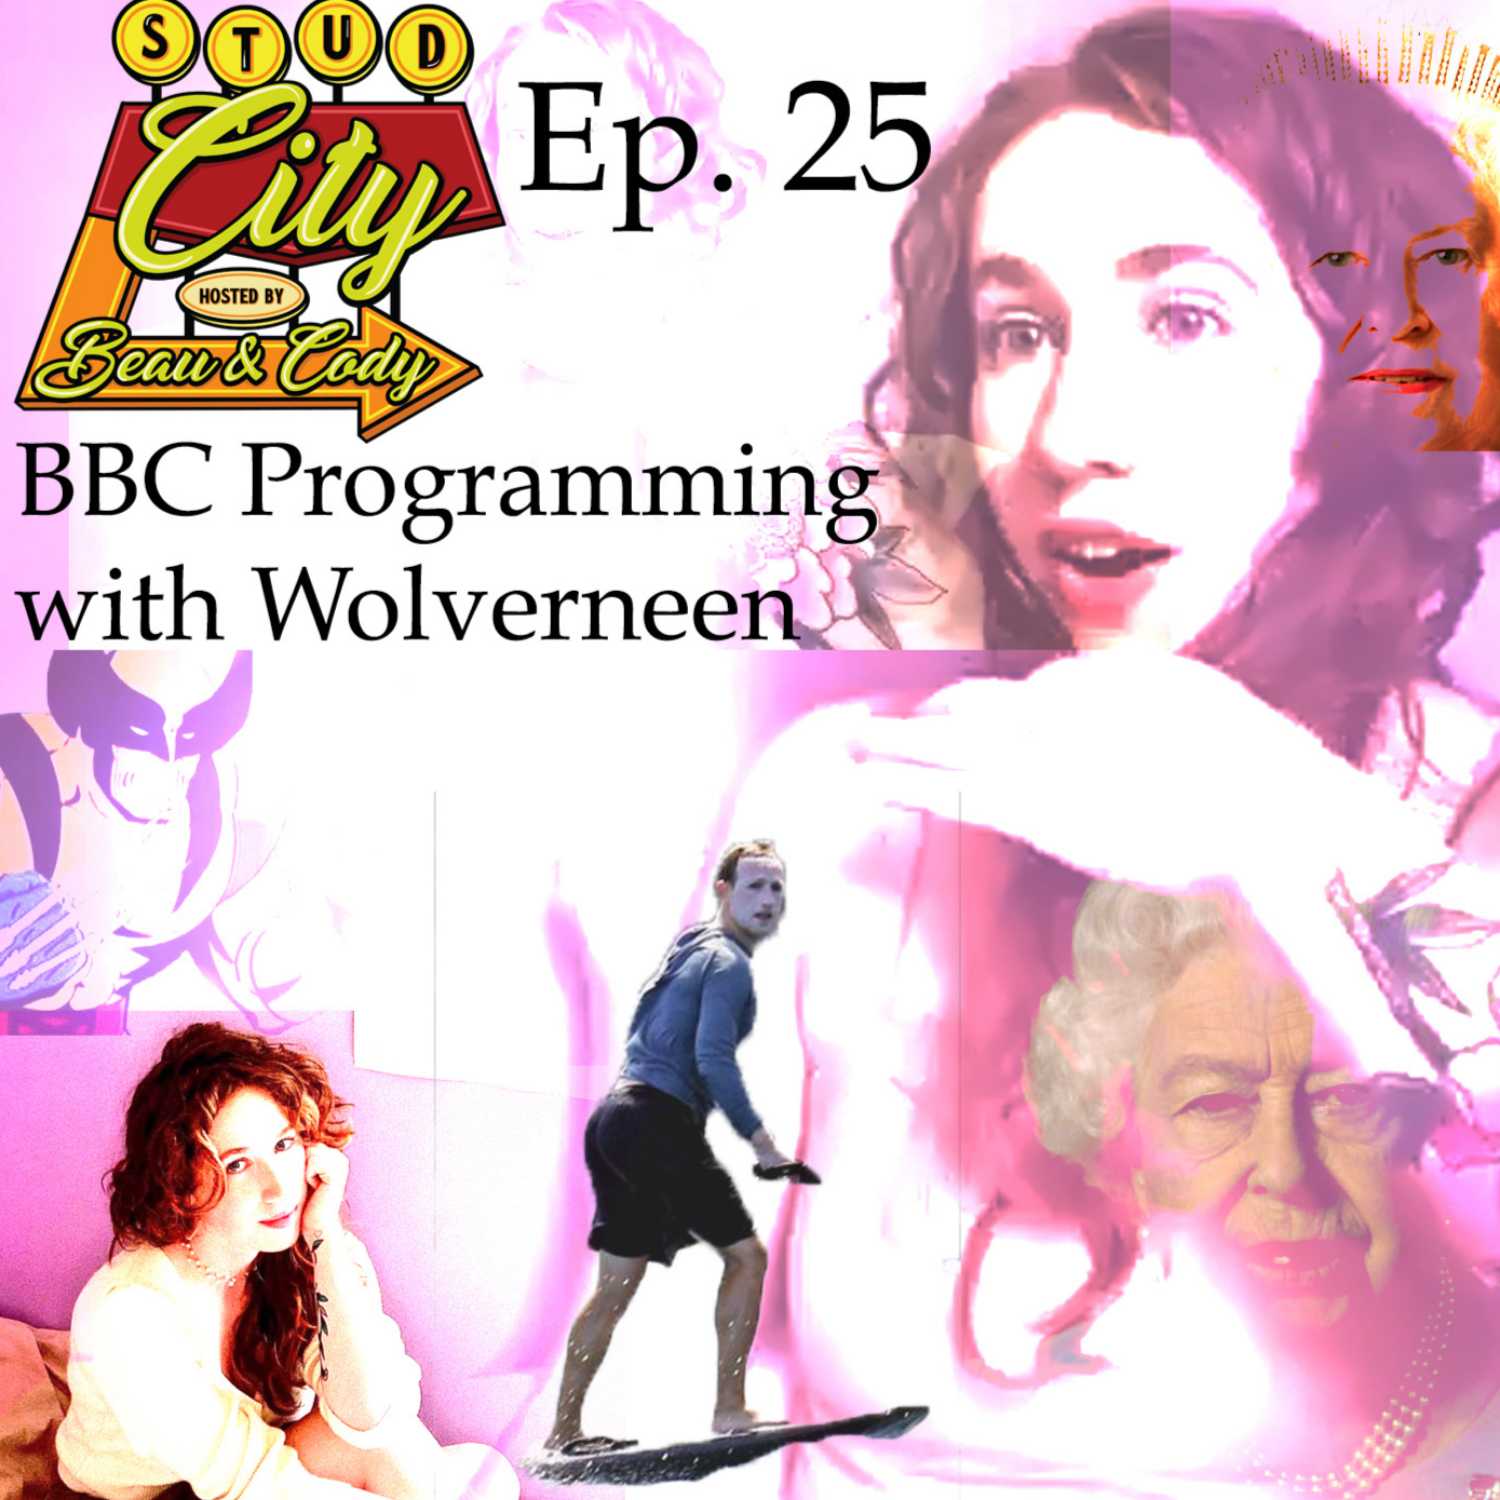 BBC Programming W Wolverneen by Stud City | Podchaser